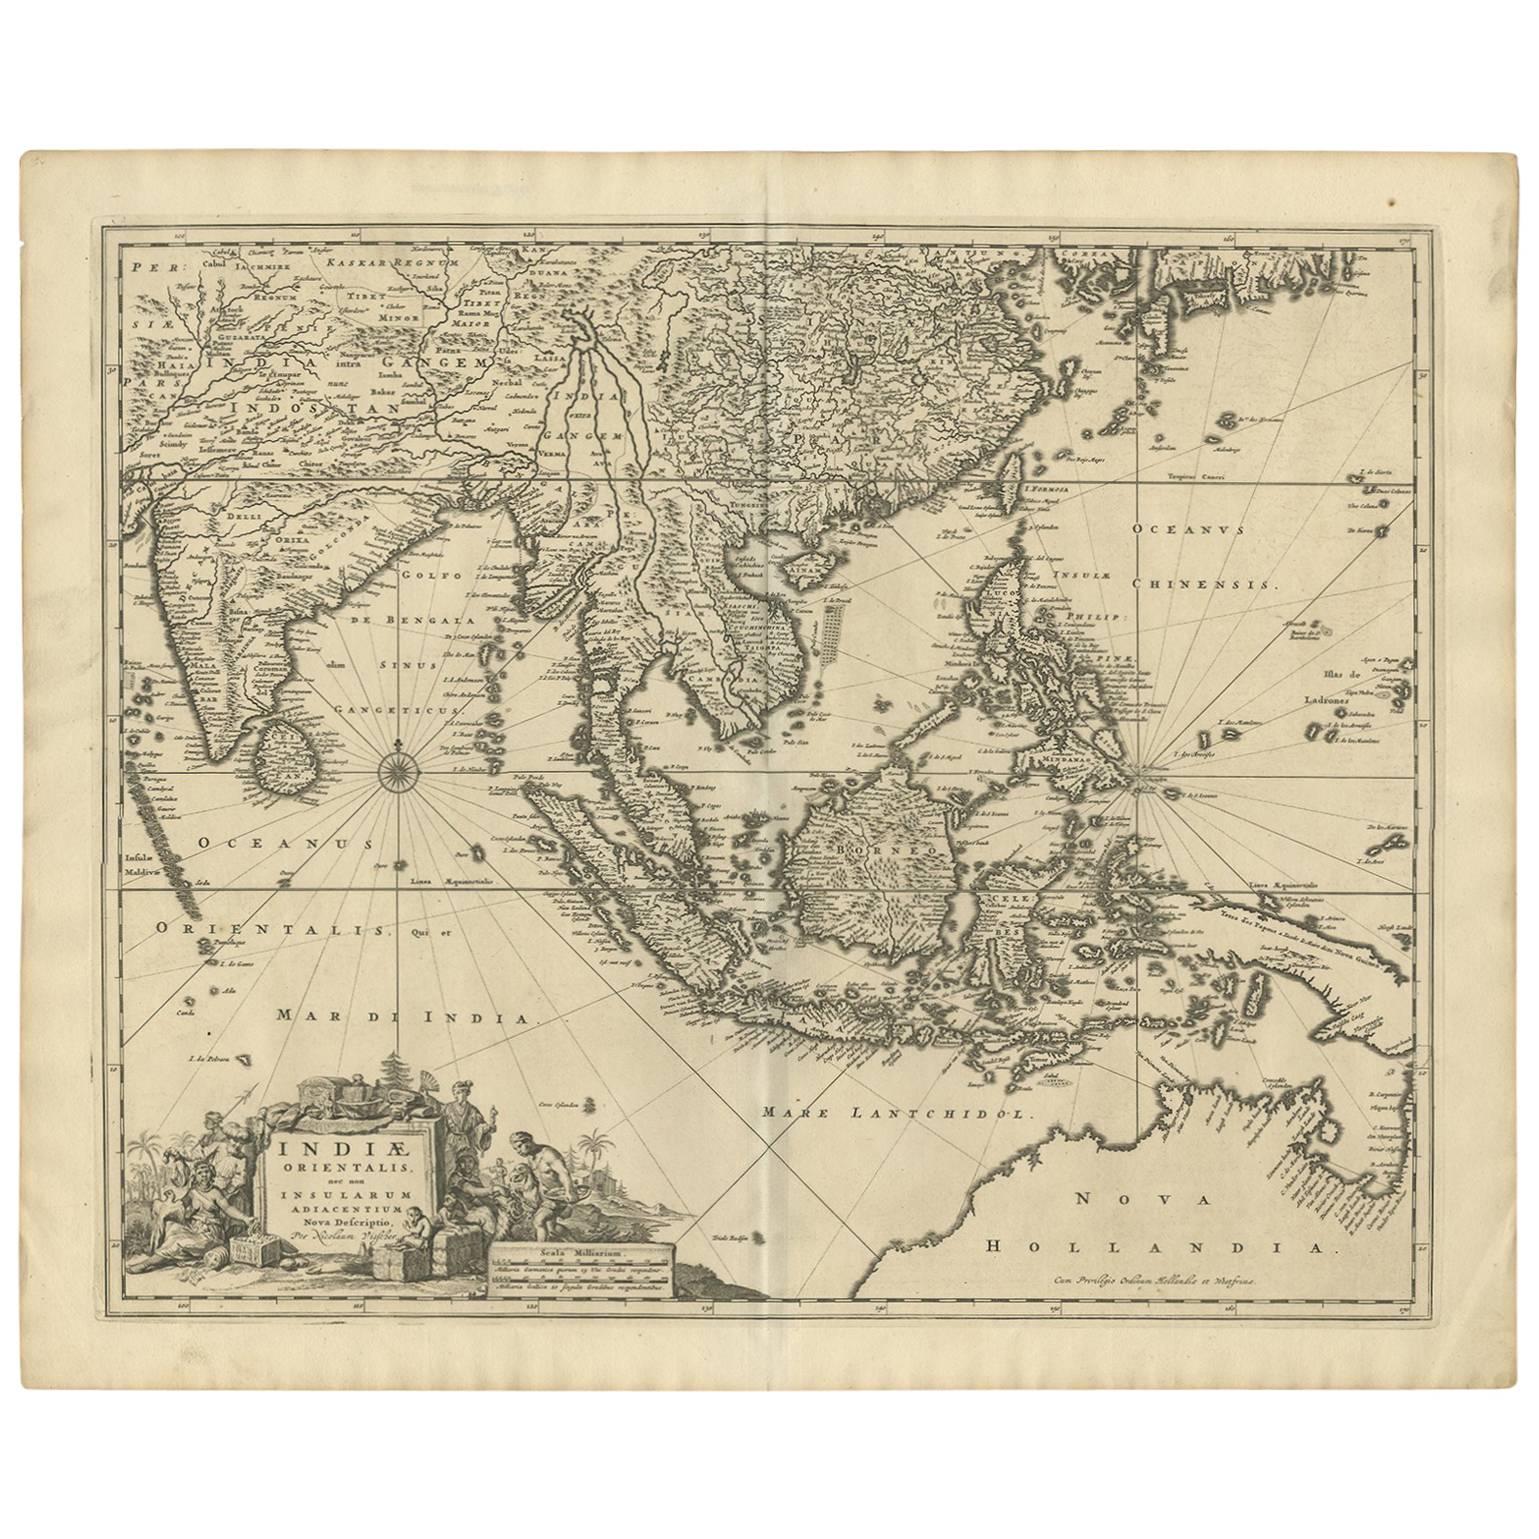 Antique Map of Southeast Asia 'India, Indonesia' by N. Visscher, circa 1670